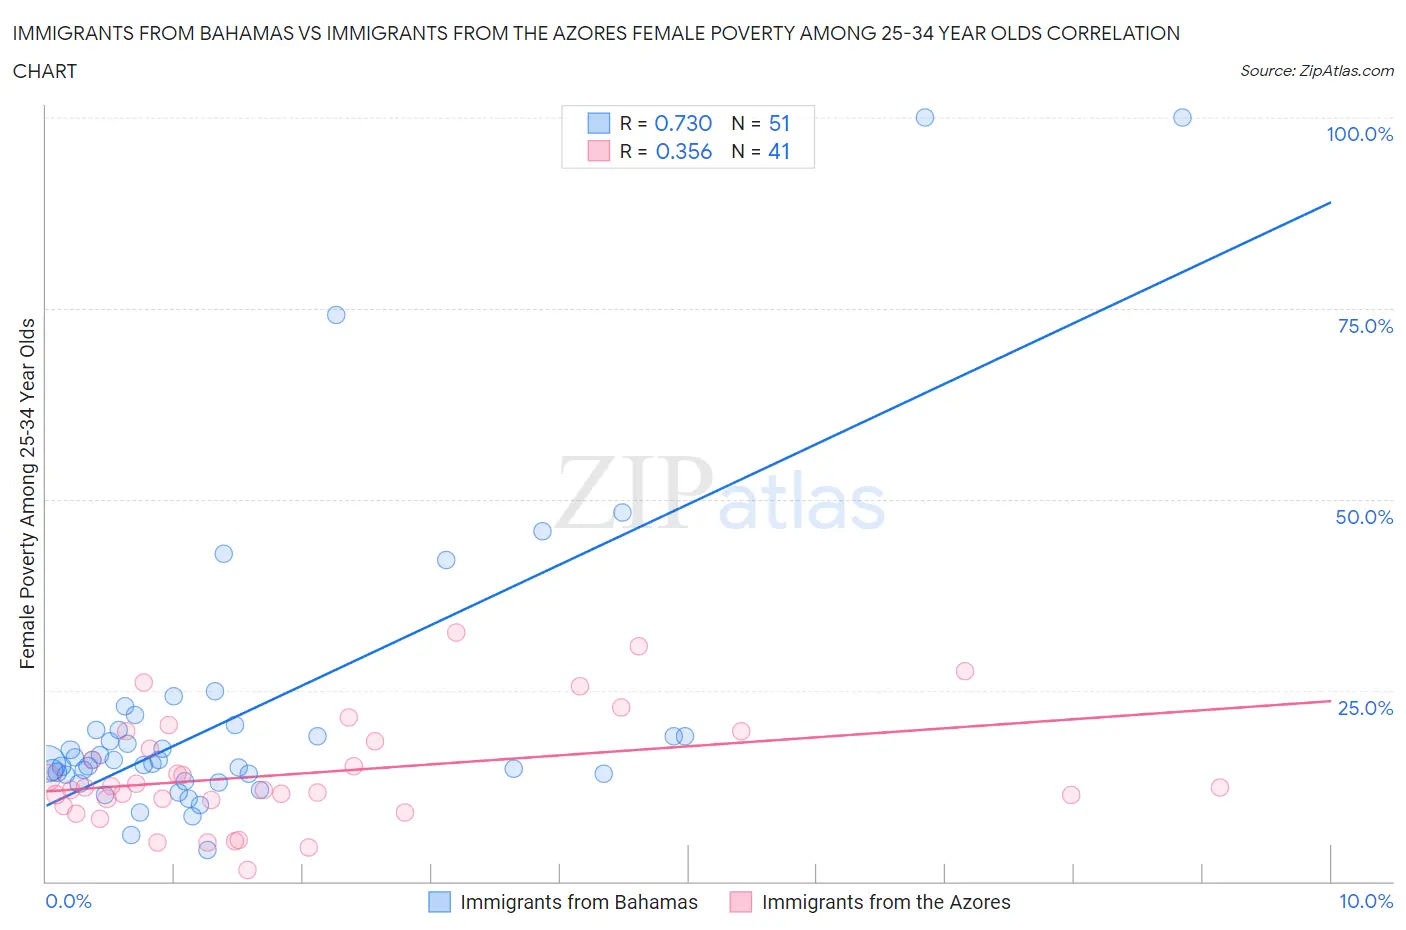 Immigrants from Bahamas vs Immigrants from the Azores Female Poverty Among 25-34 Year Olds